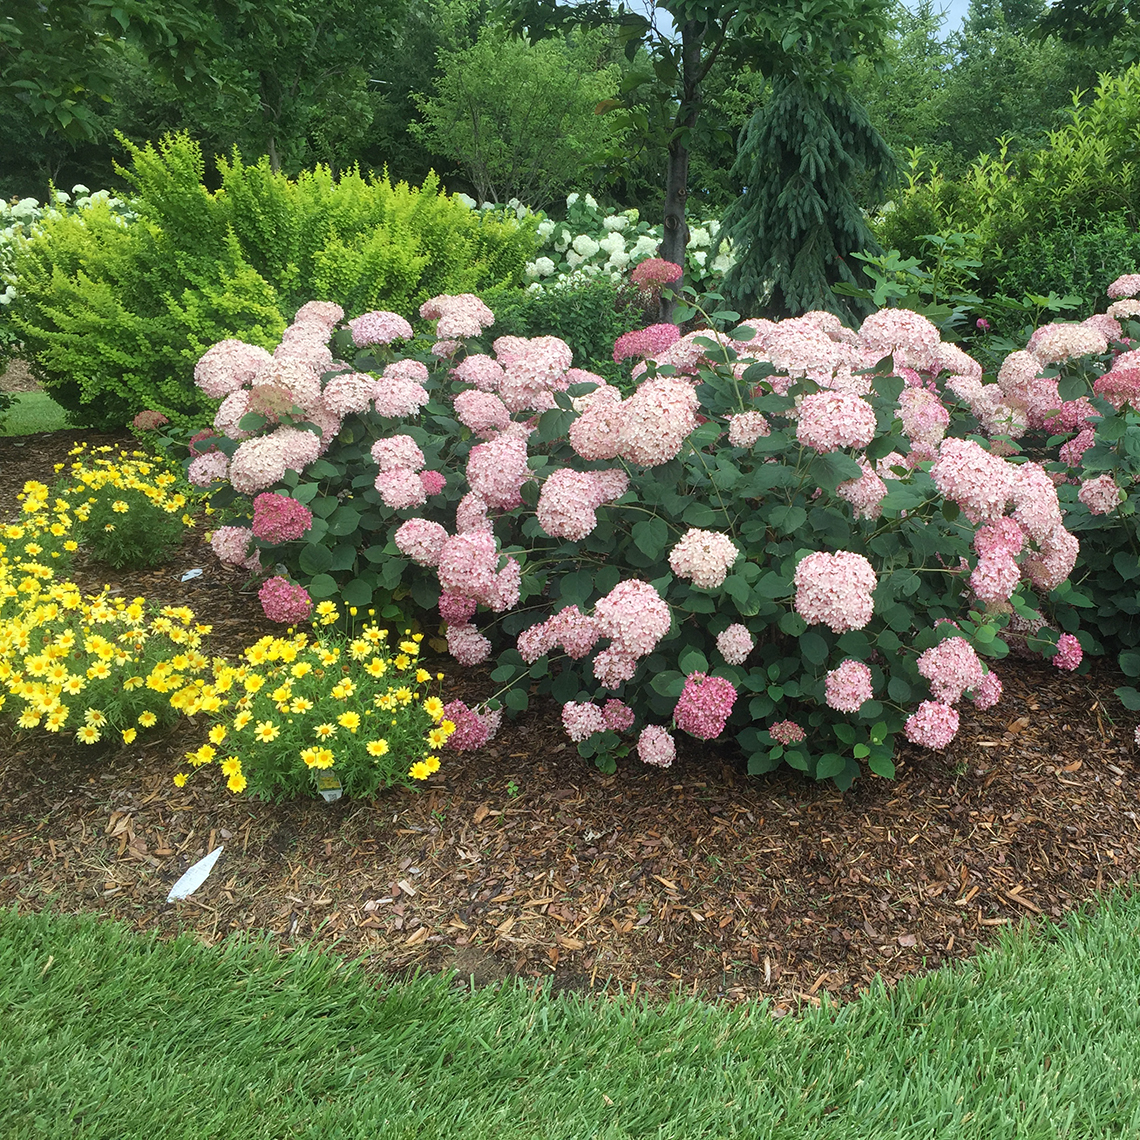 A specimen of Incrediball Blush hydrangea blooming in a landscape with yellow flowers below it